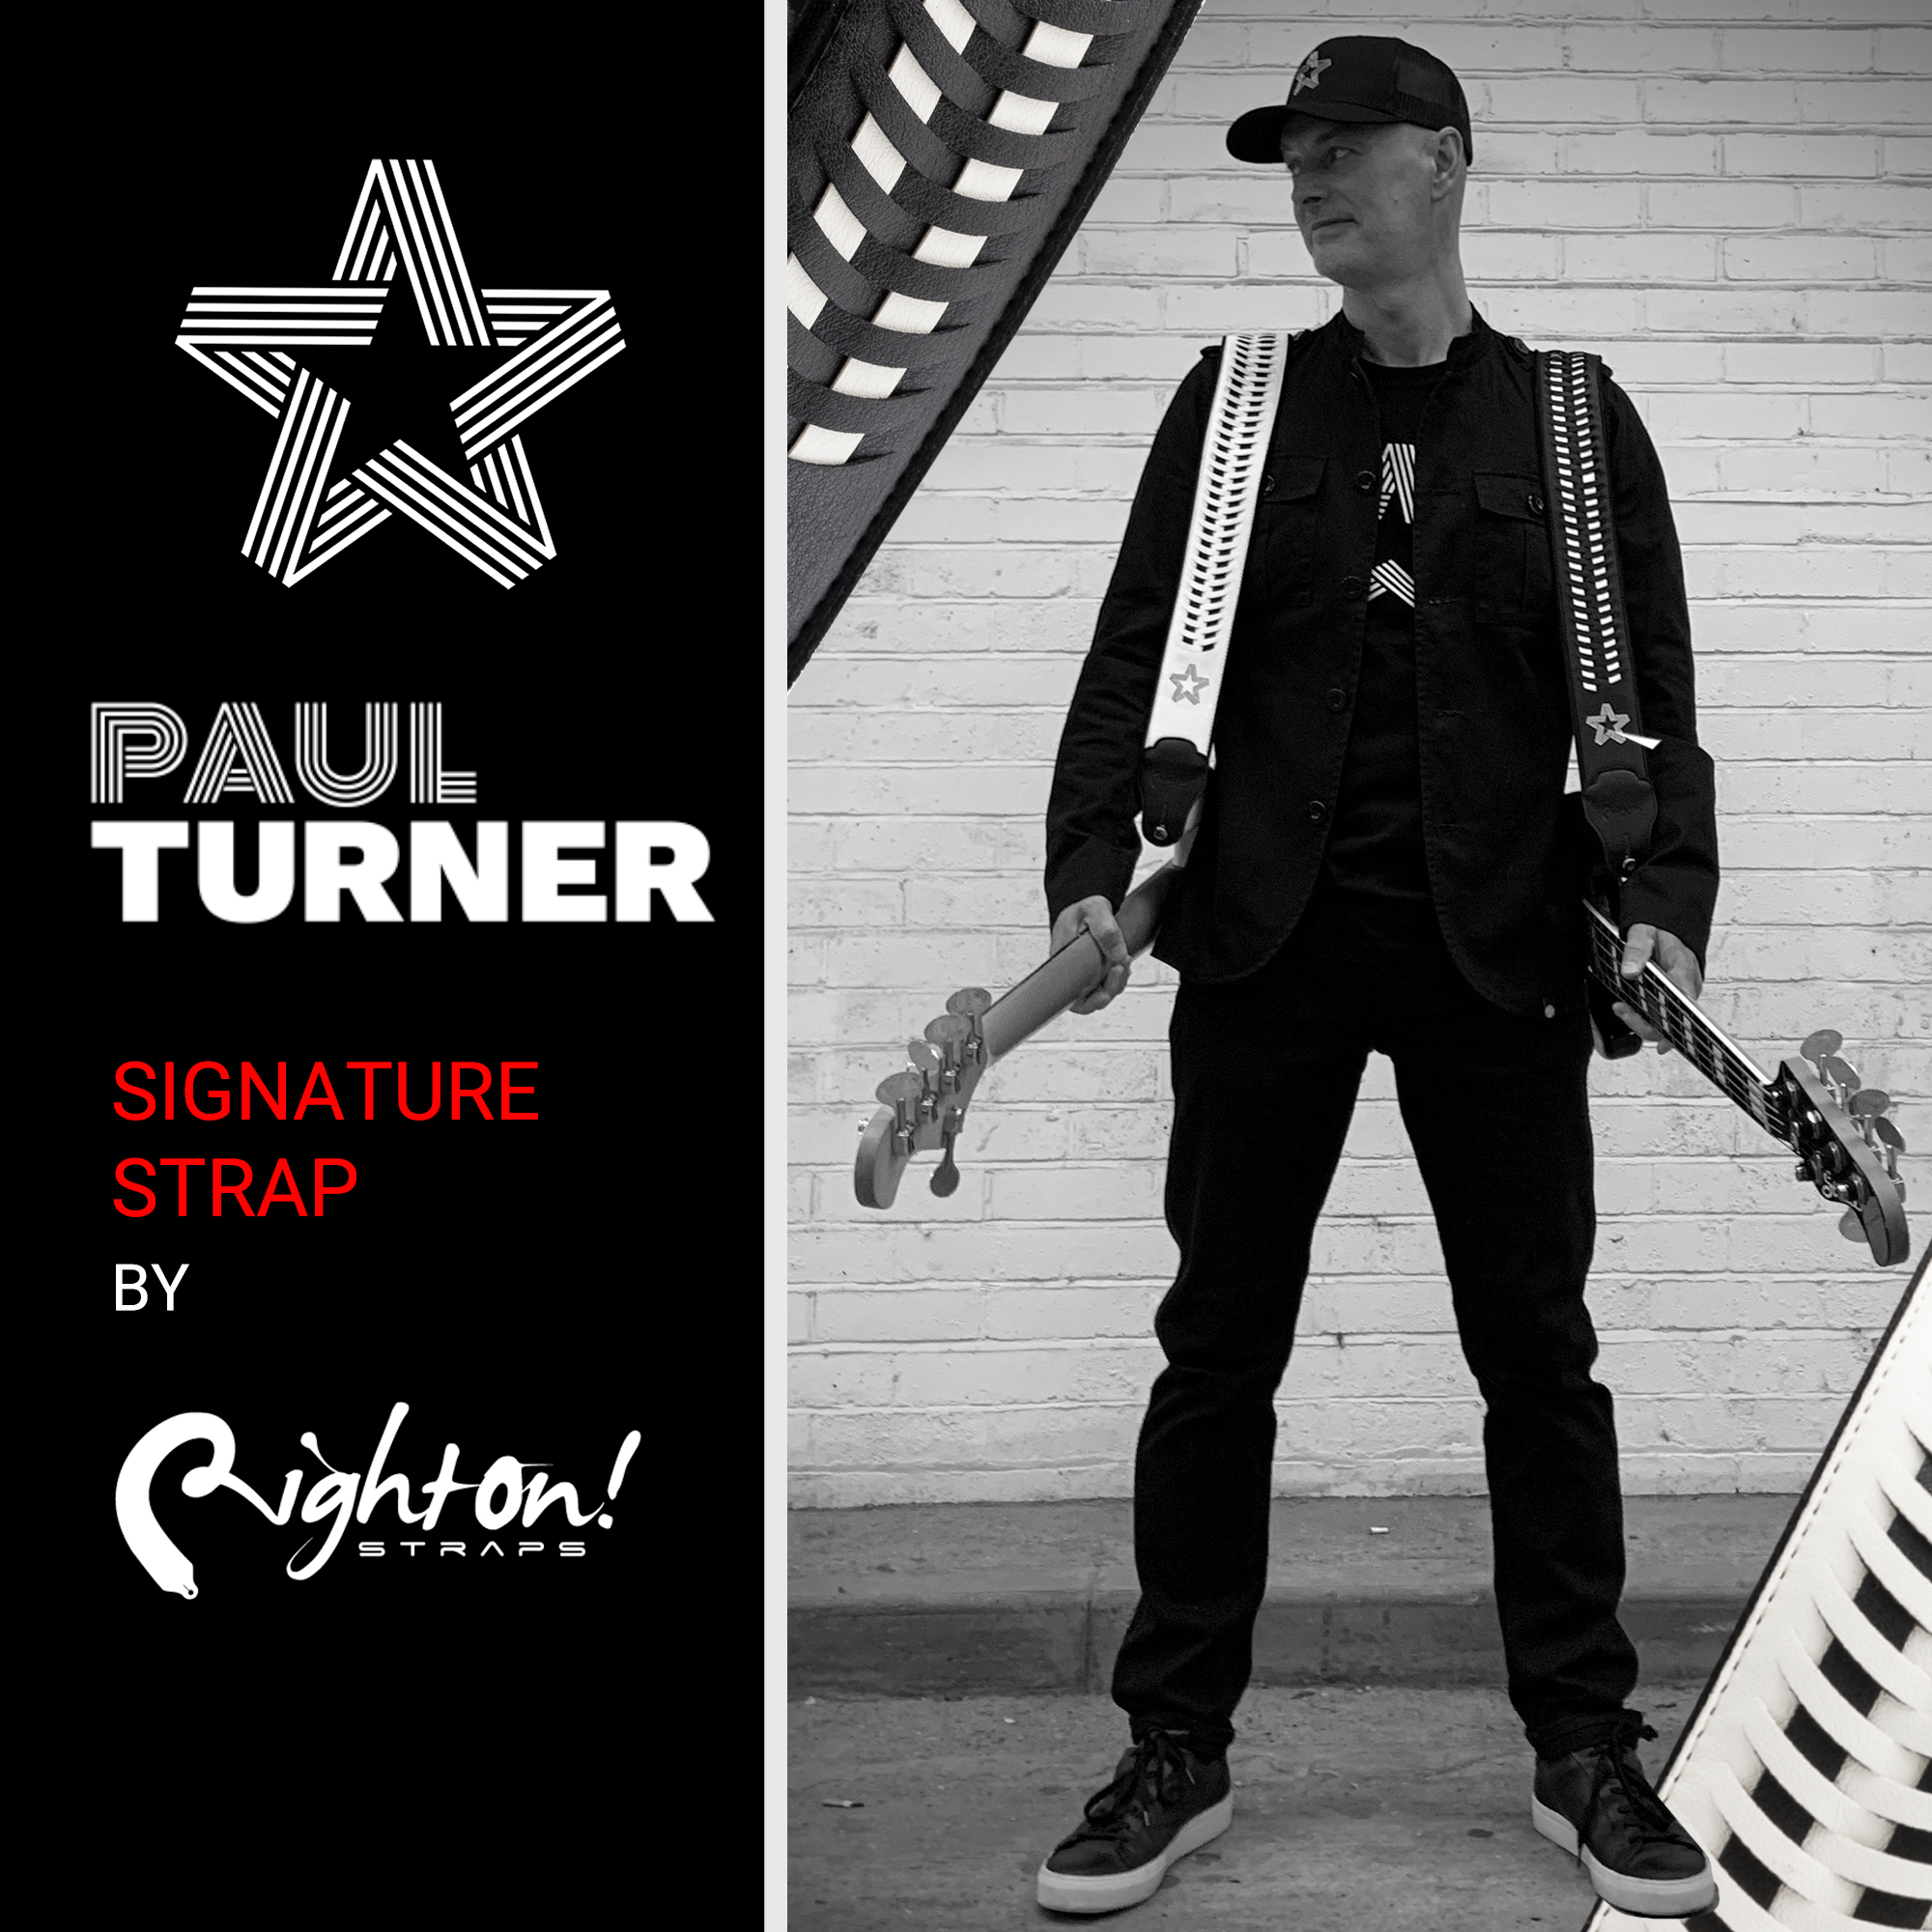 The new Paul Turner bass strap, signature